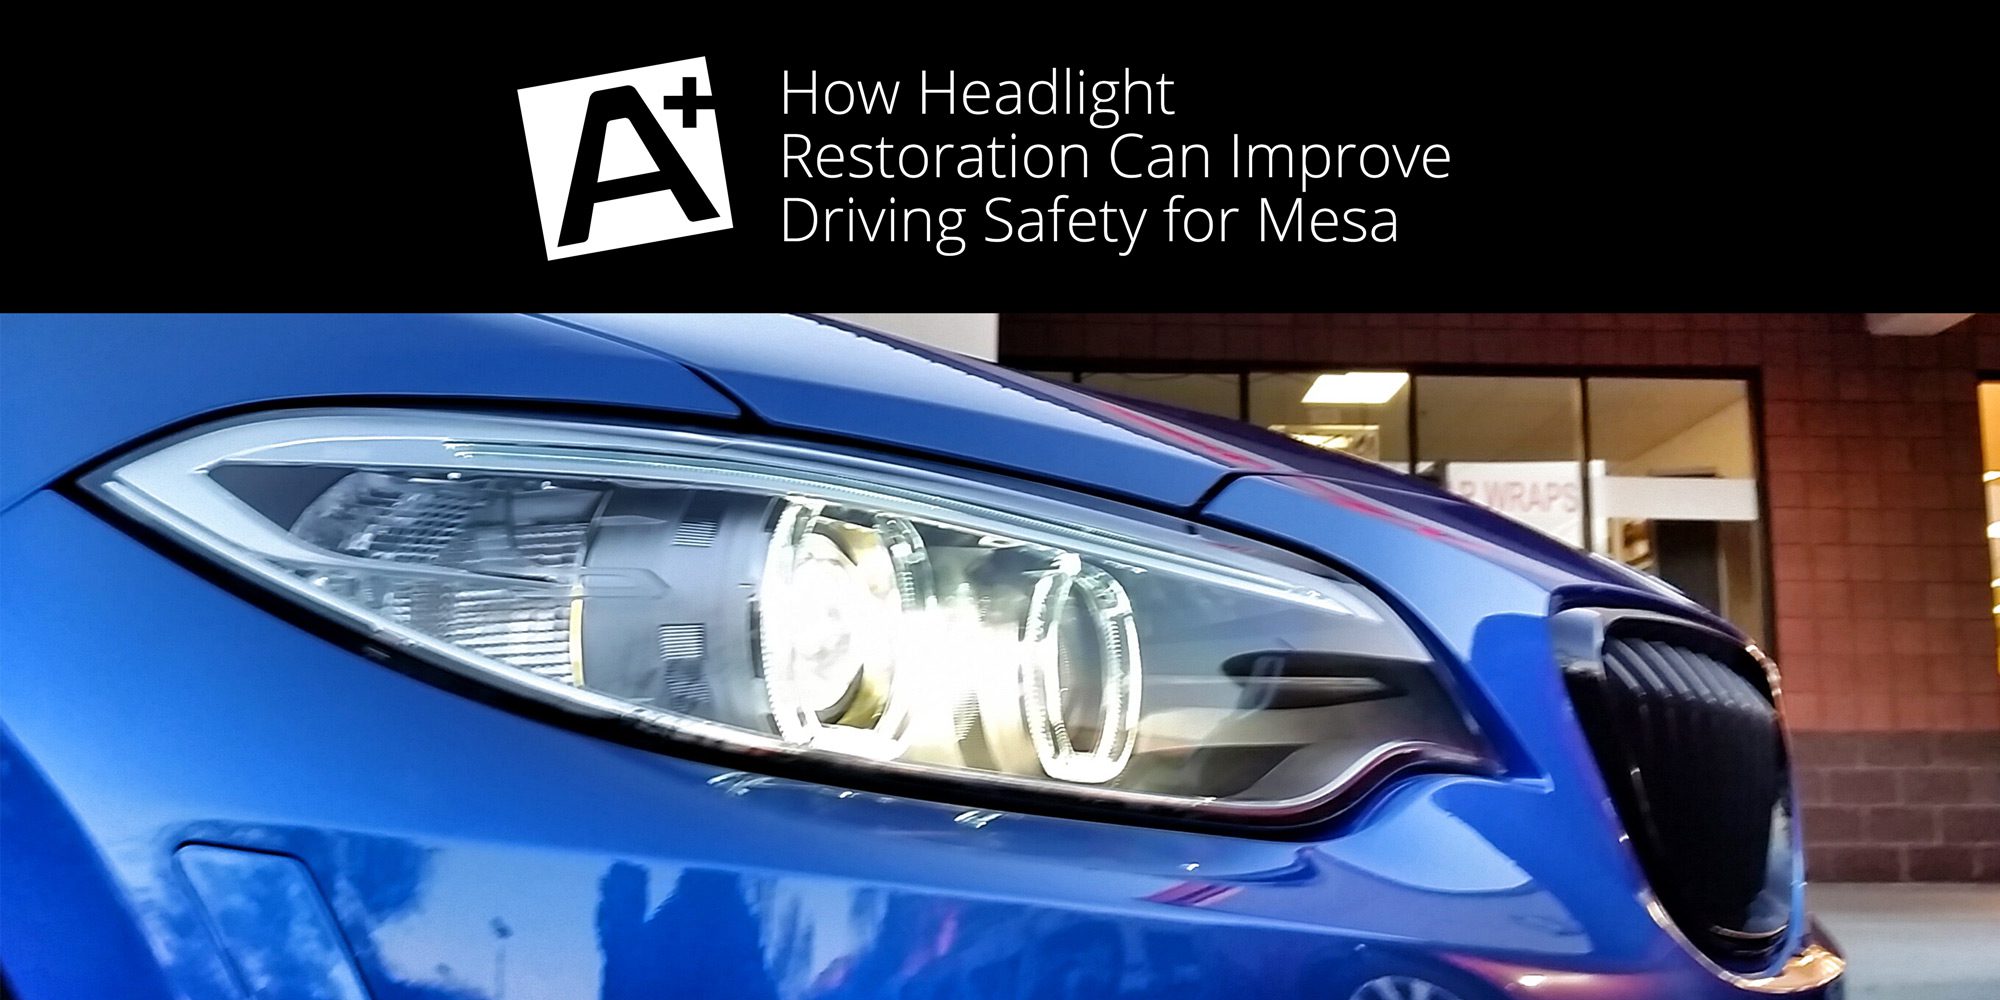 How-Headlight-Restoration-Can-Improve-Driving-Safety-for-Mesa